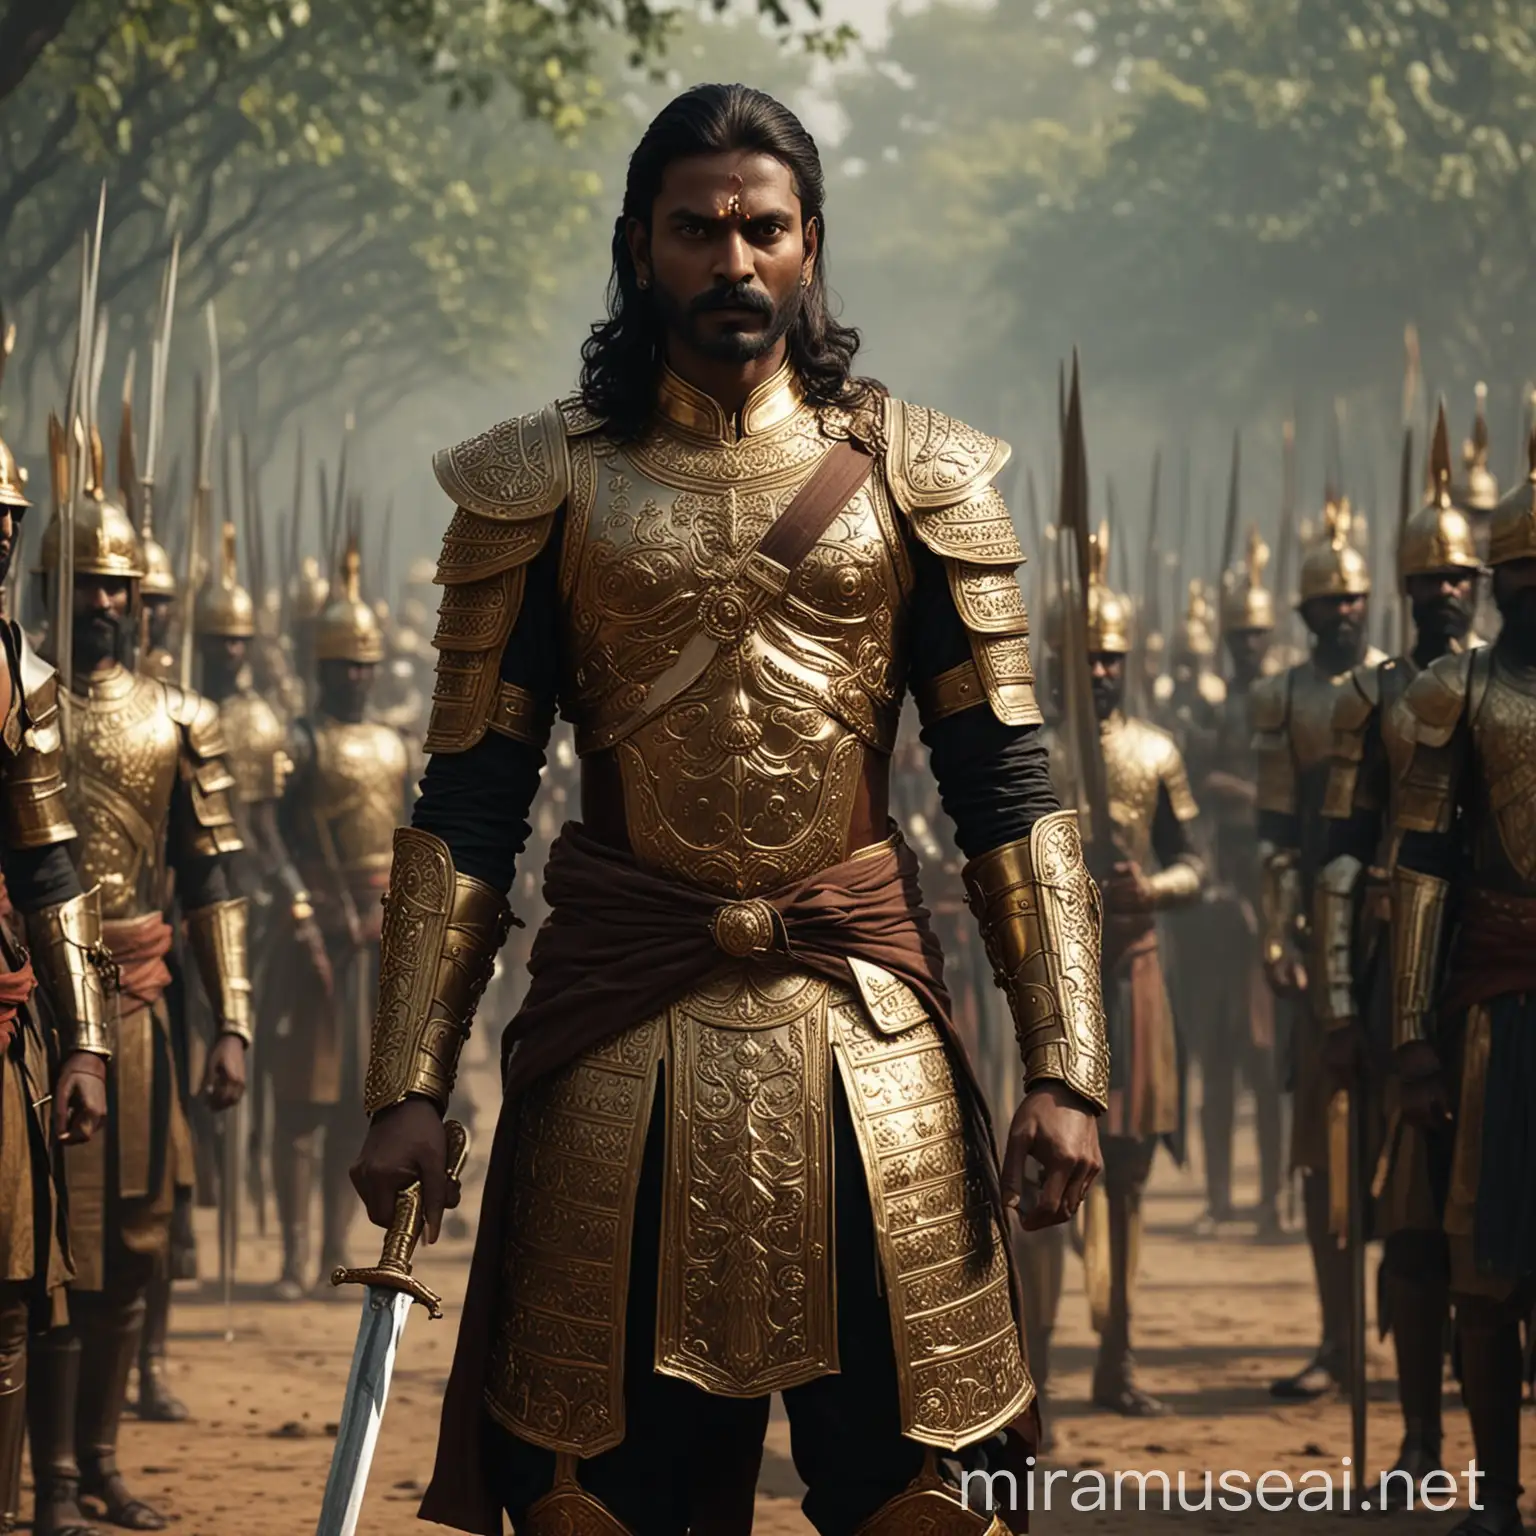 Cinematic Scene of South Indian King and Soldiers in Golden and Silver Armor Battling Enemies